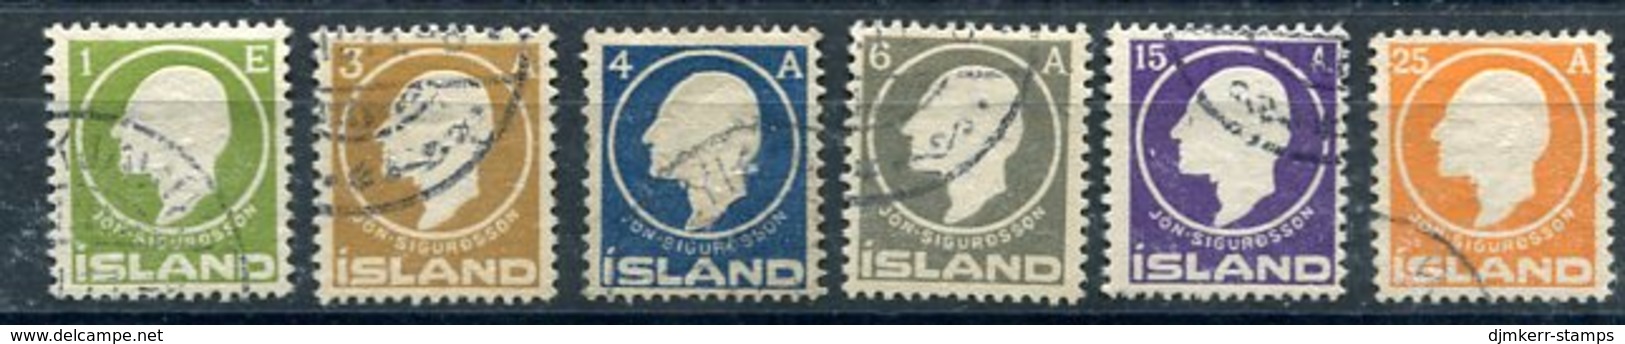 ICELAND 1911 Sigurdsson Centenary Set Used.  Michel 63-68 - Used Stamps